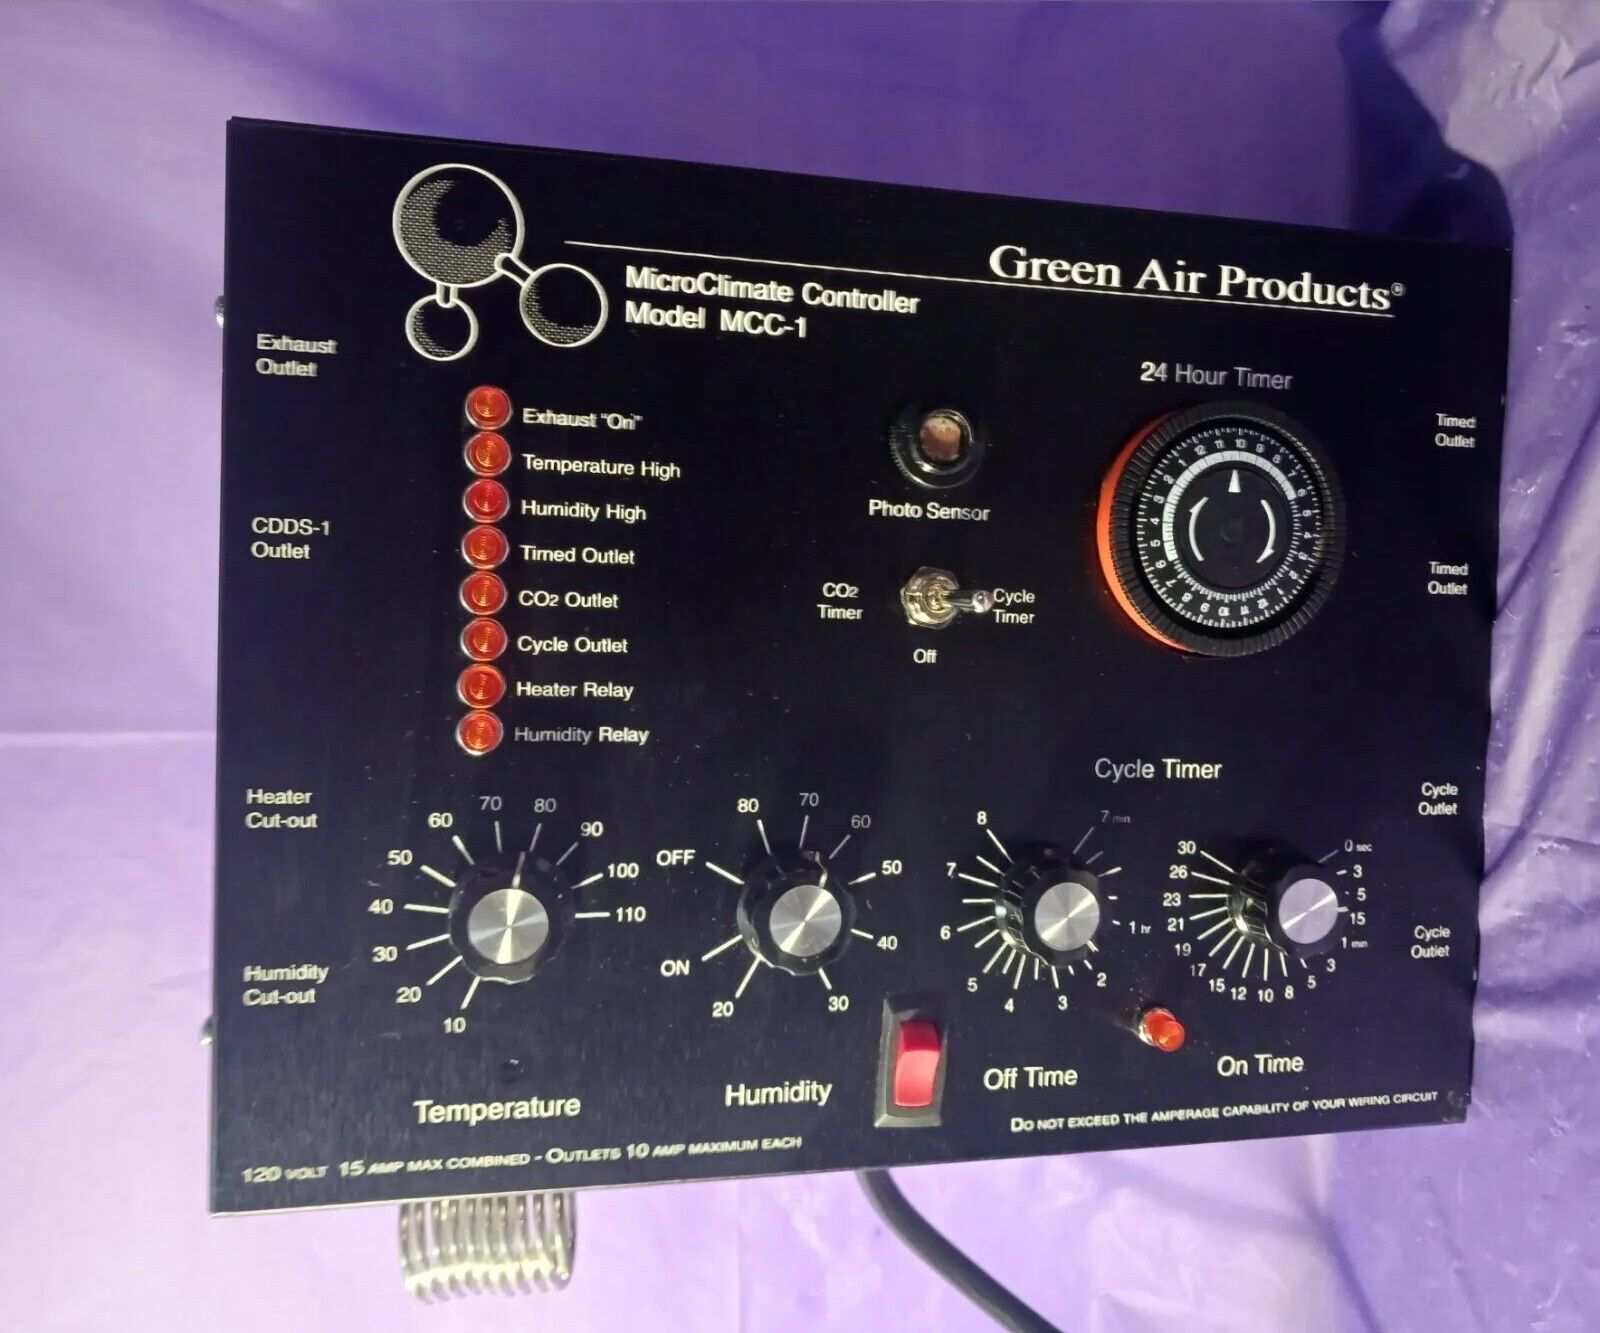 Green Air Products MCC-1 Microclimate Controller FOR INDOOR GROW OR GREENHOUSE